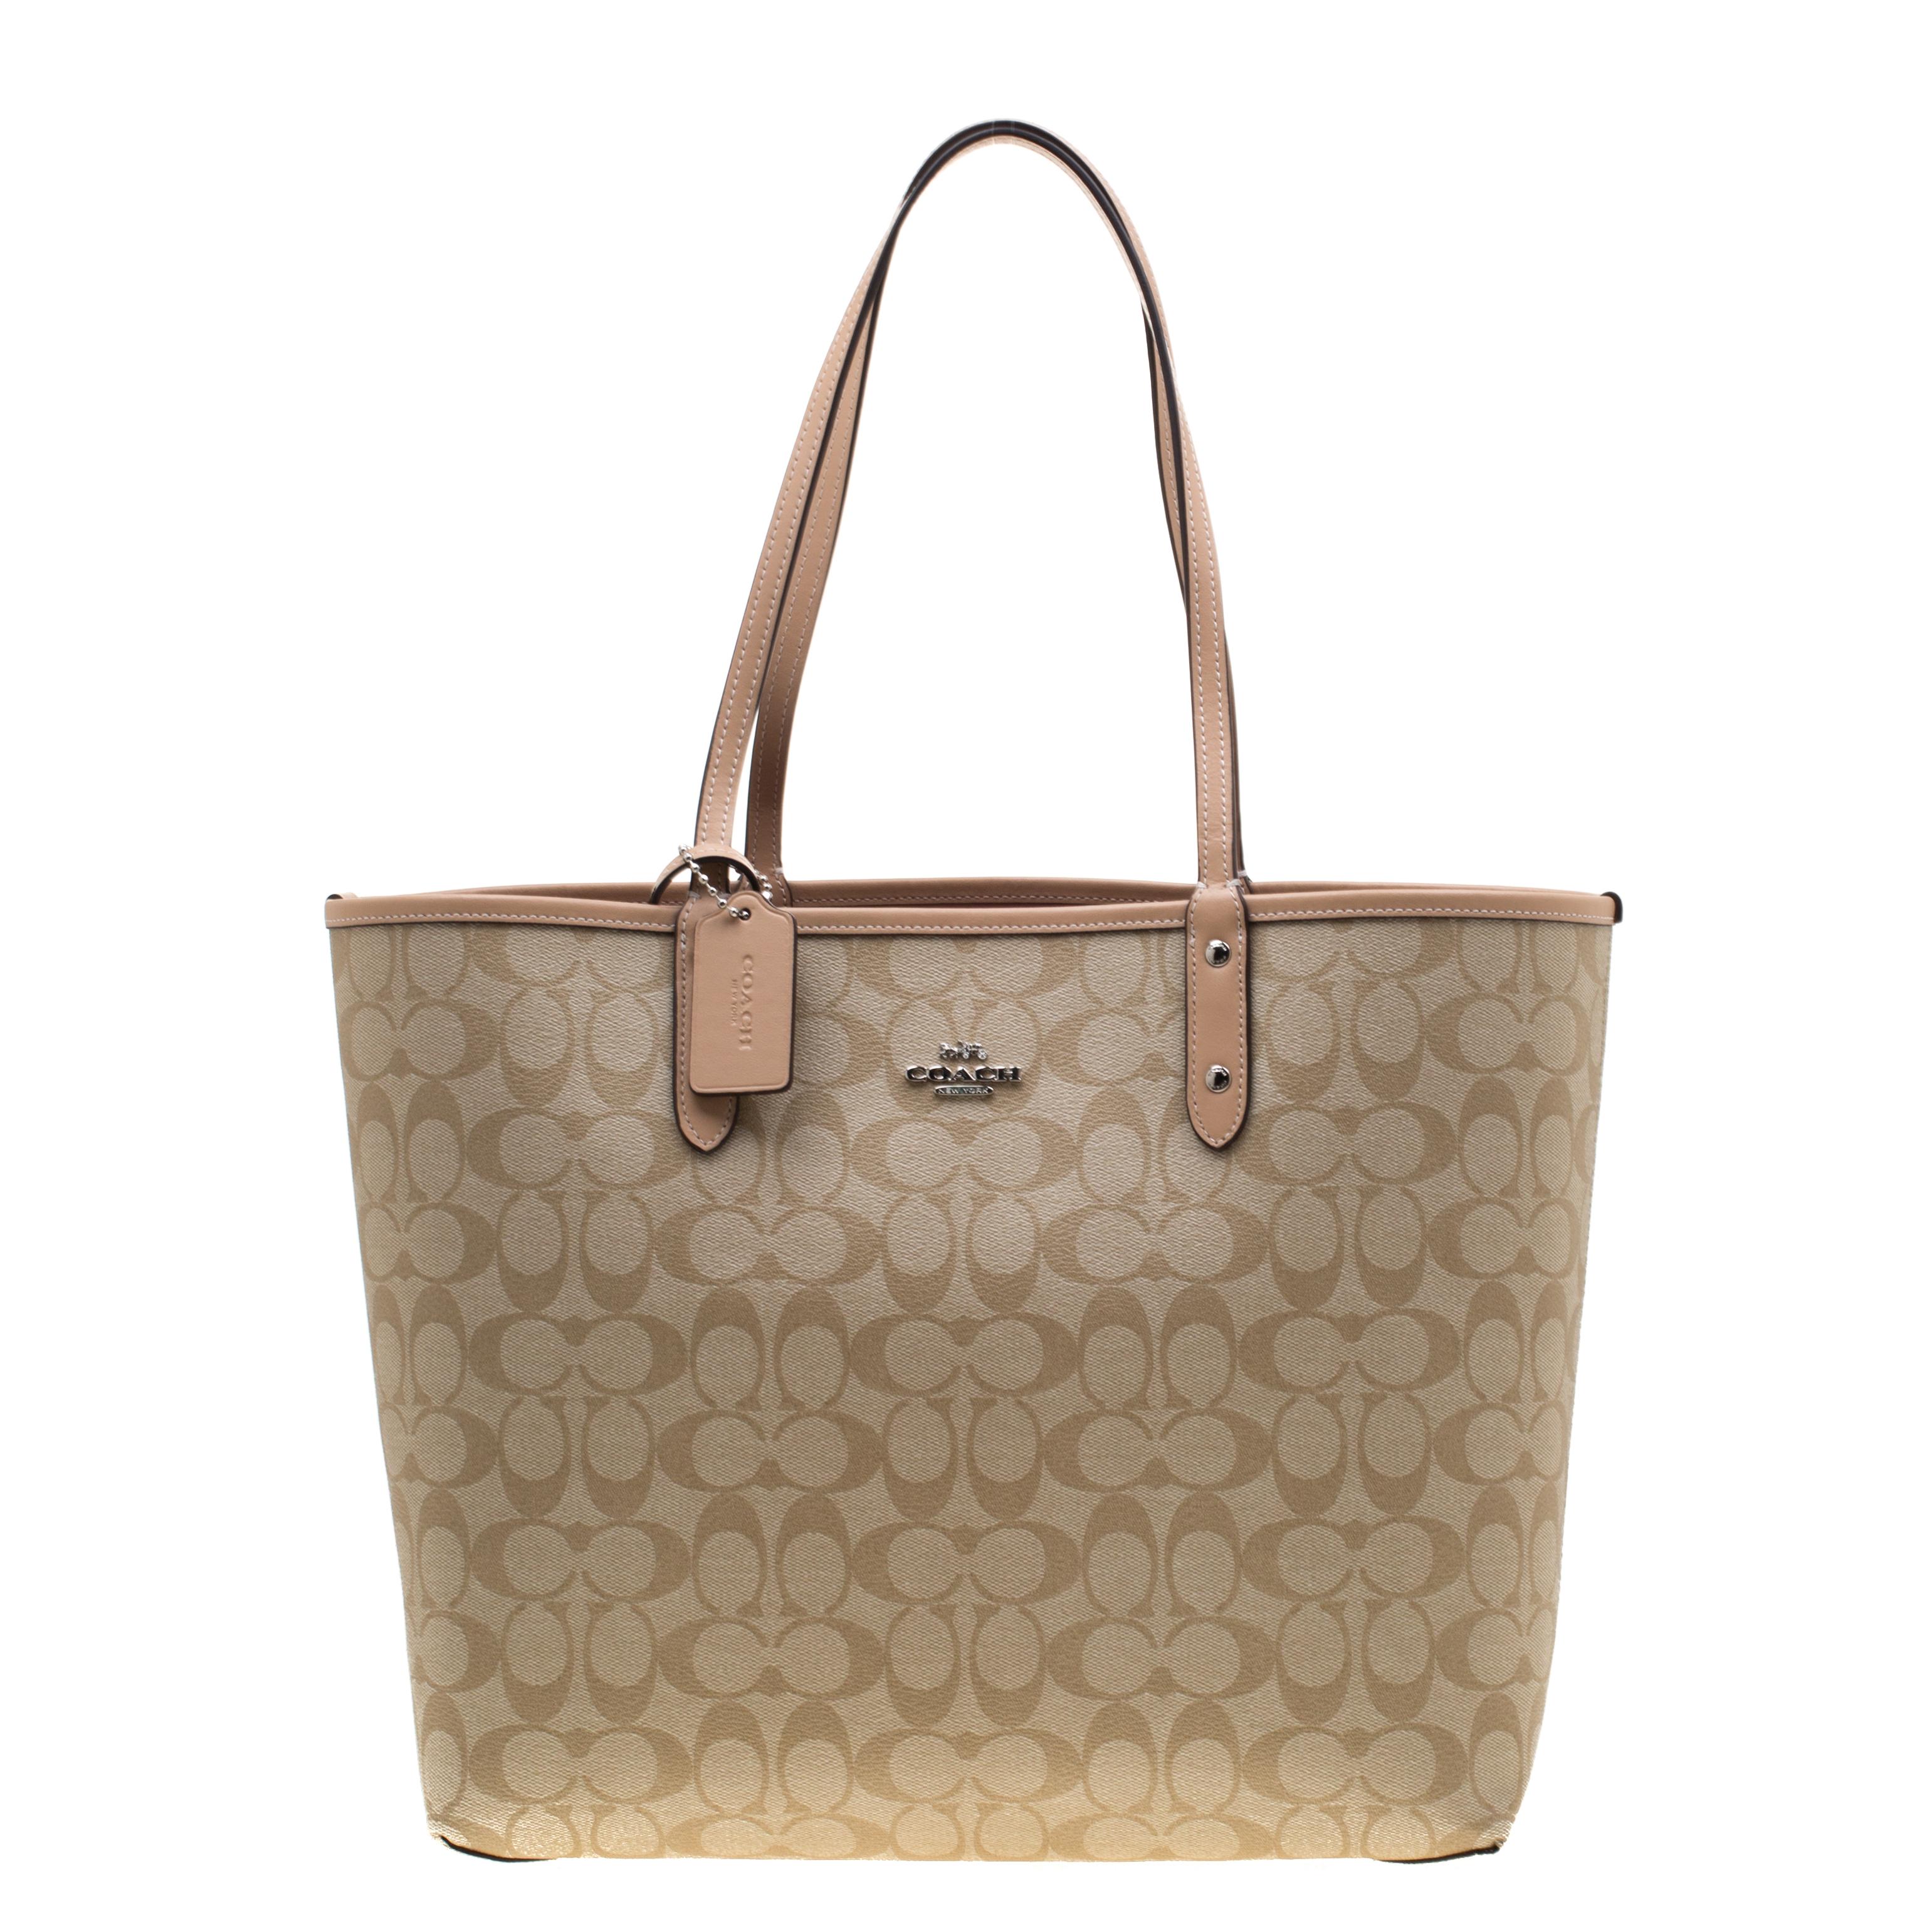 This Reversible City tote by Coach has a structure that simply spells sophistication. The bag has a signature canvas side and a floral printed one and it is elegantly held by two top handles. The tote is sized to store your necessities well, and the